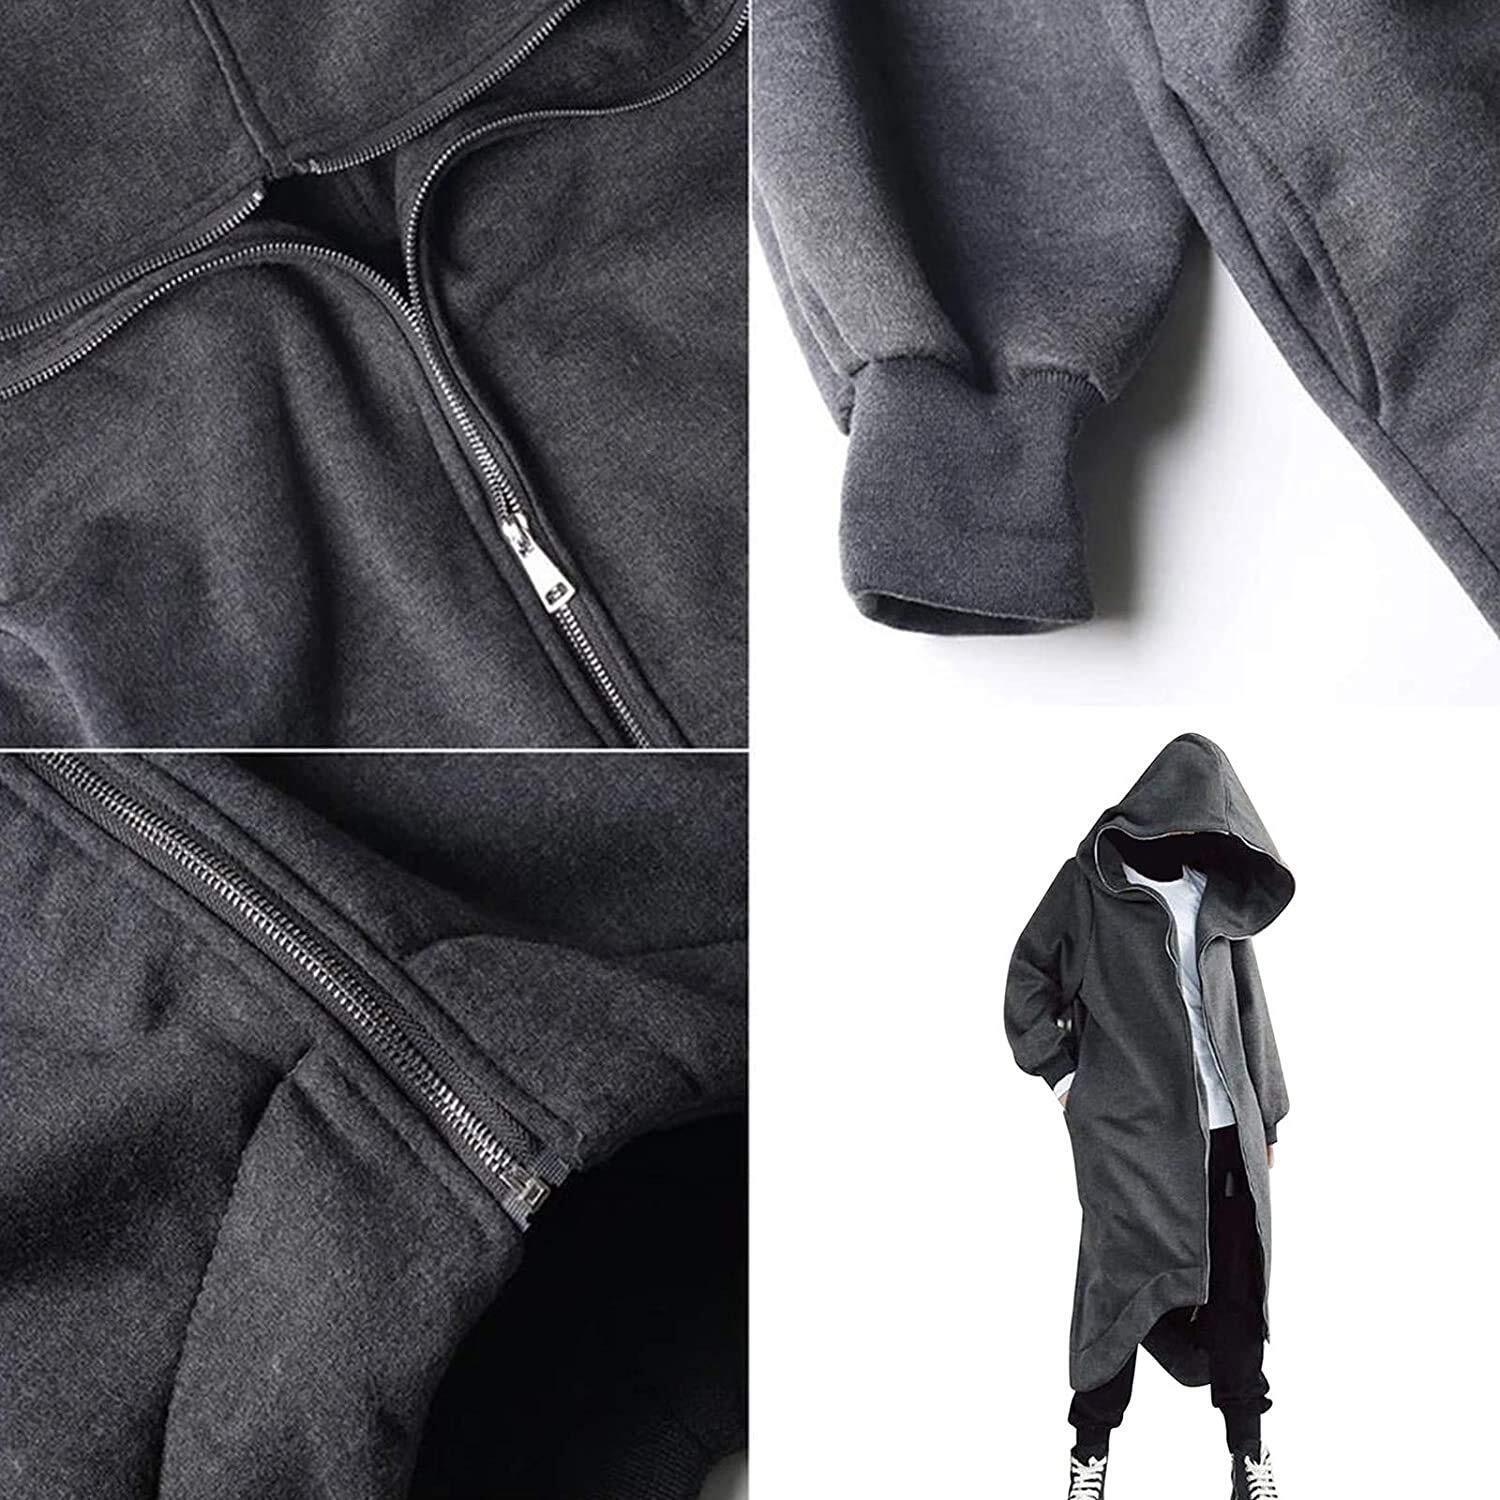 2022 Unisex Long Sleeve Hooded Nazgul Long Coat ( Customizable pictures and text )